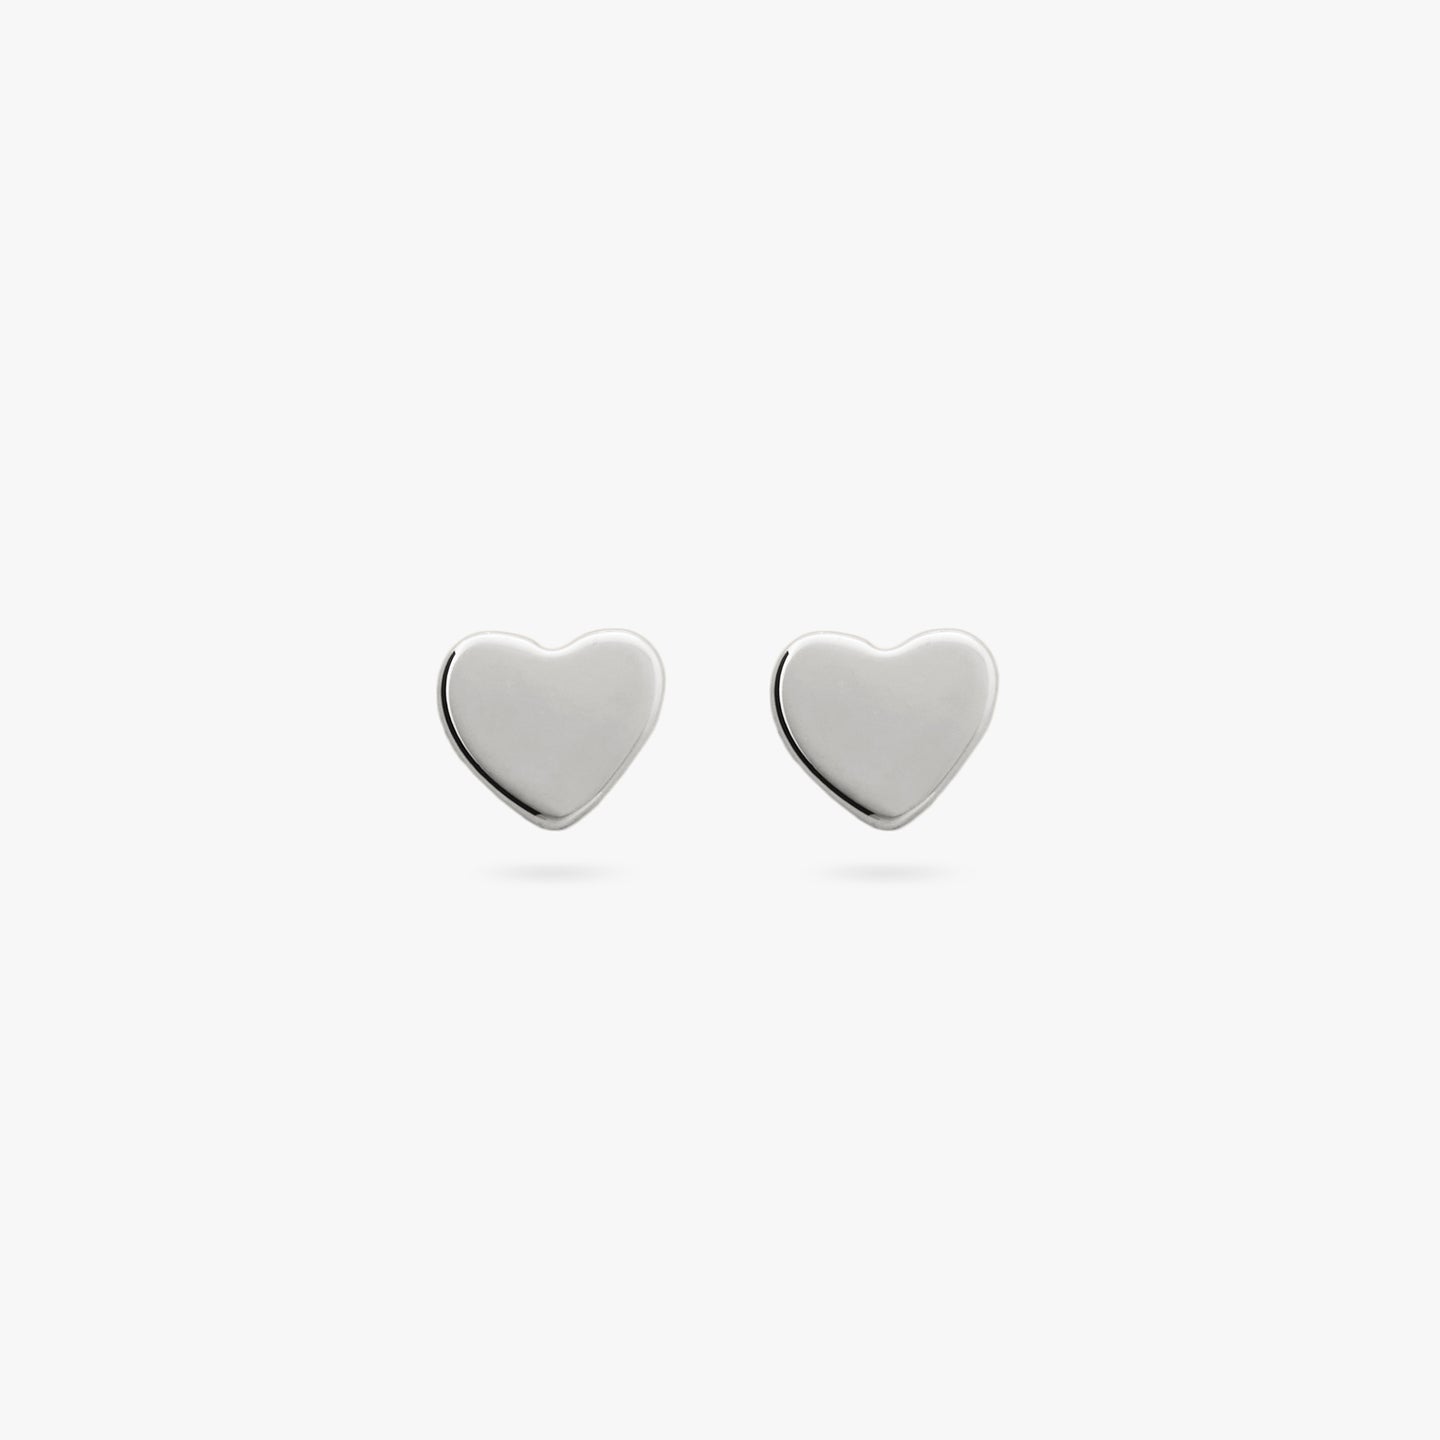 This is a pair of small silver studs in the shape of a heart color:null|silver